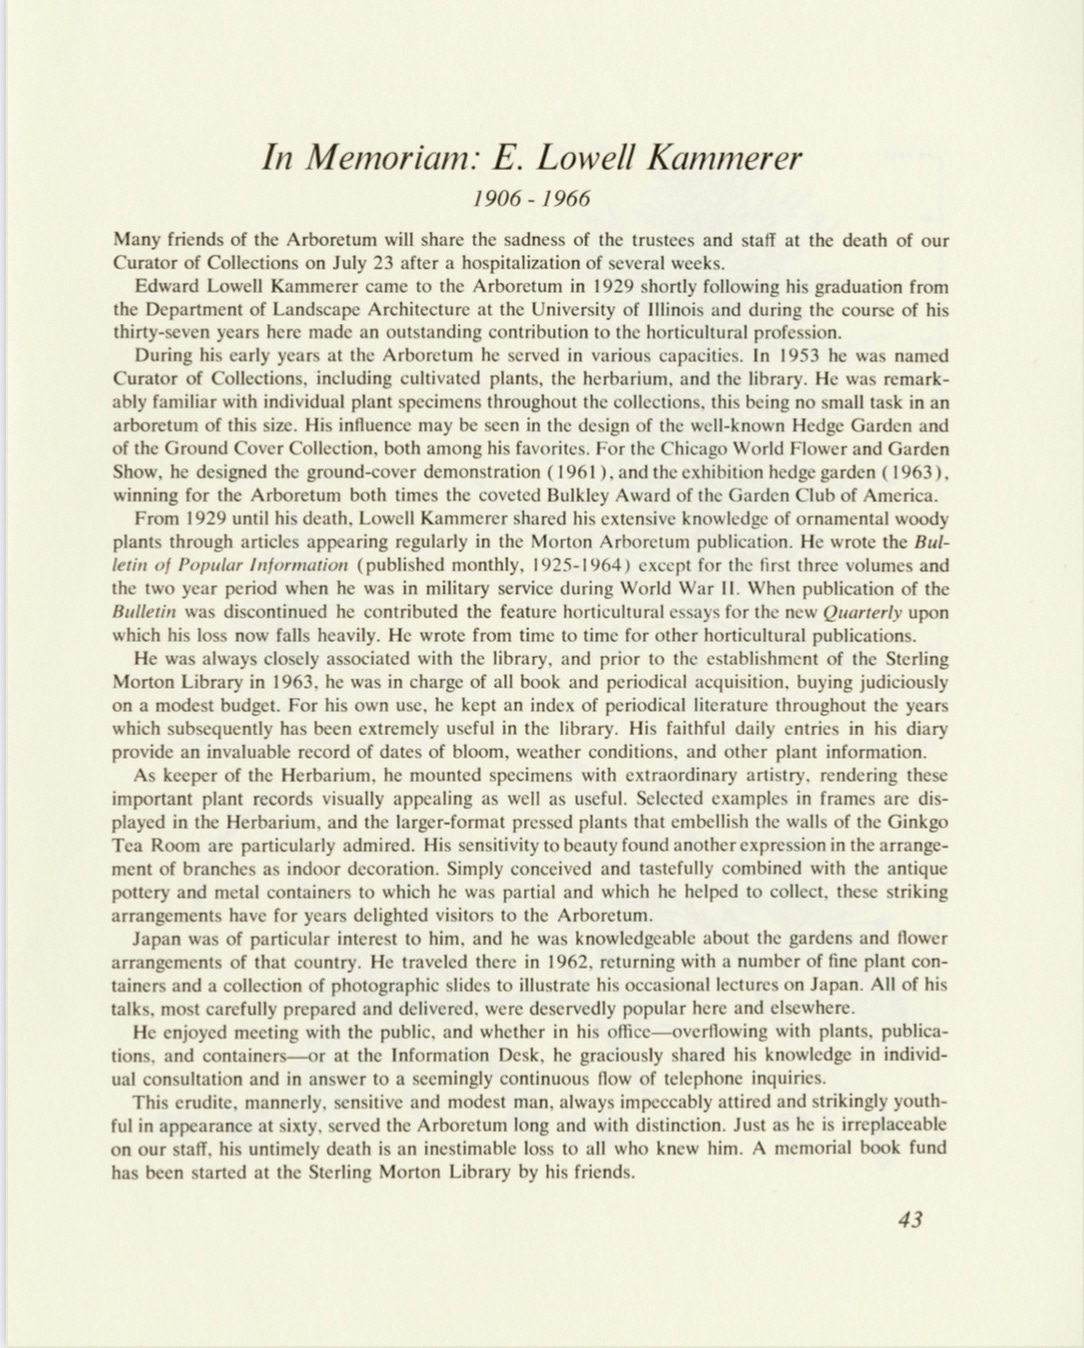 Page with the header "In Memorium: E. Lowell Kammerer 1906-1966" followed by an obituary that focuses on his work at the Arboretum.